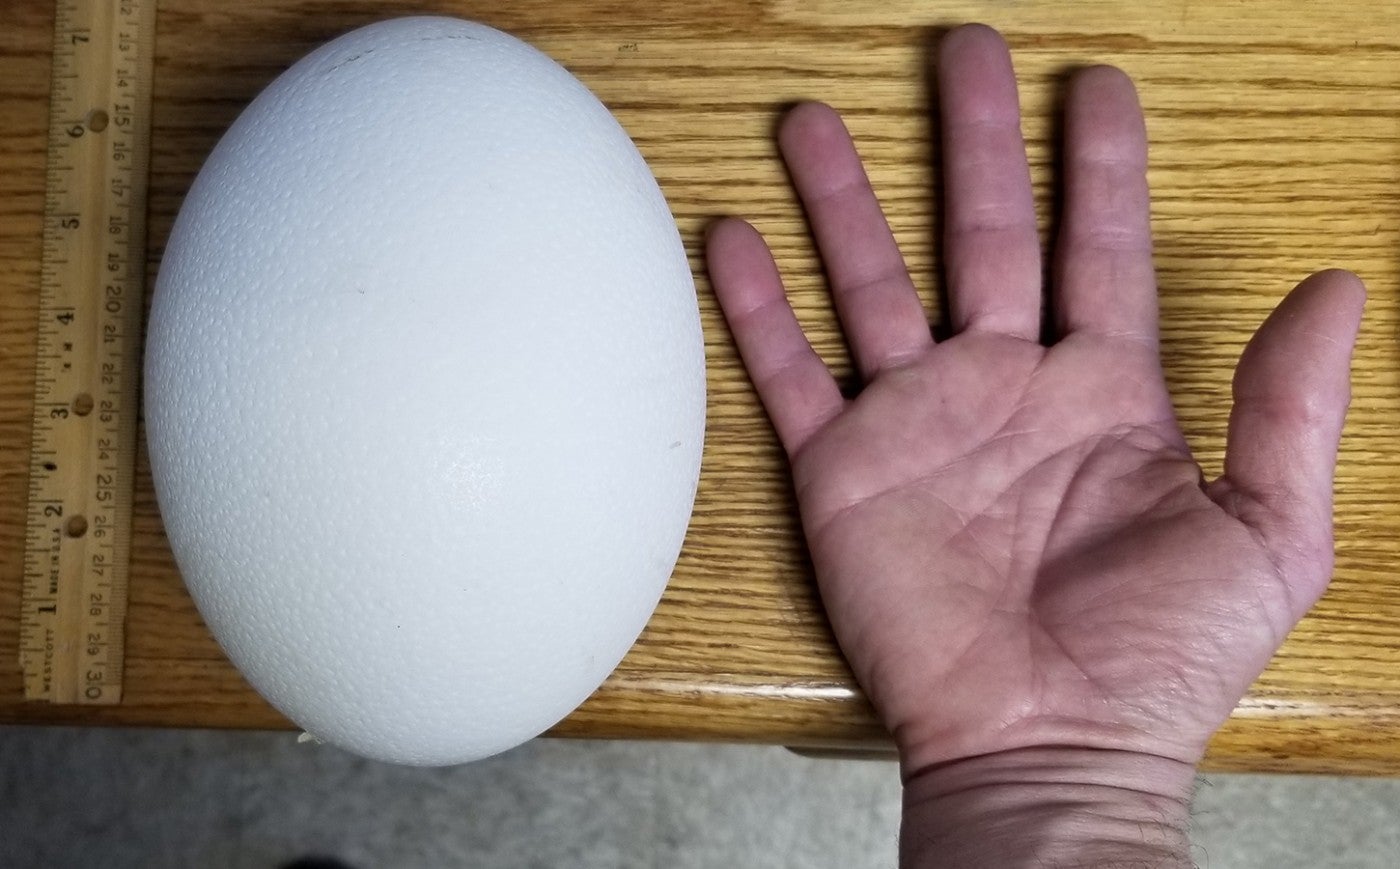 	An ostrich egg placed on a table next to an animal keeper's open hand to demonstrate its size and a ruler showing the egg is about 7 inches long